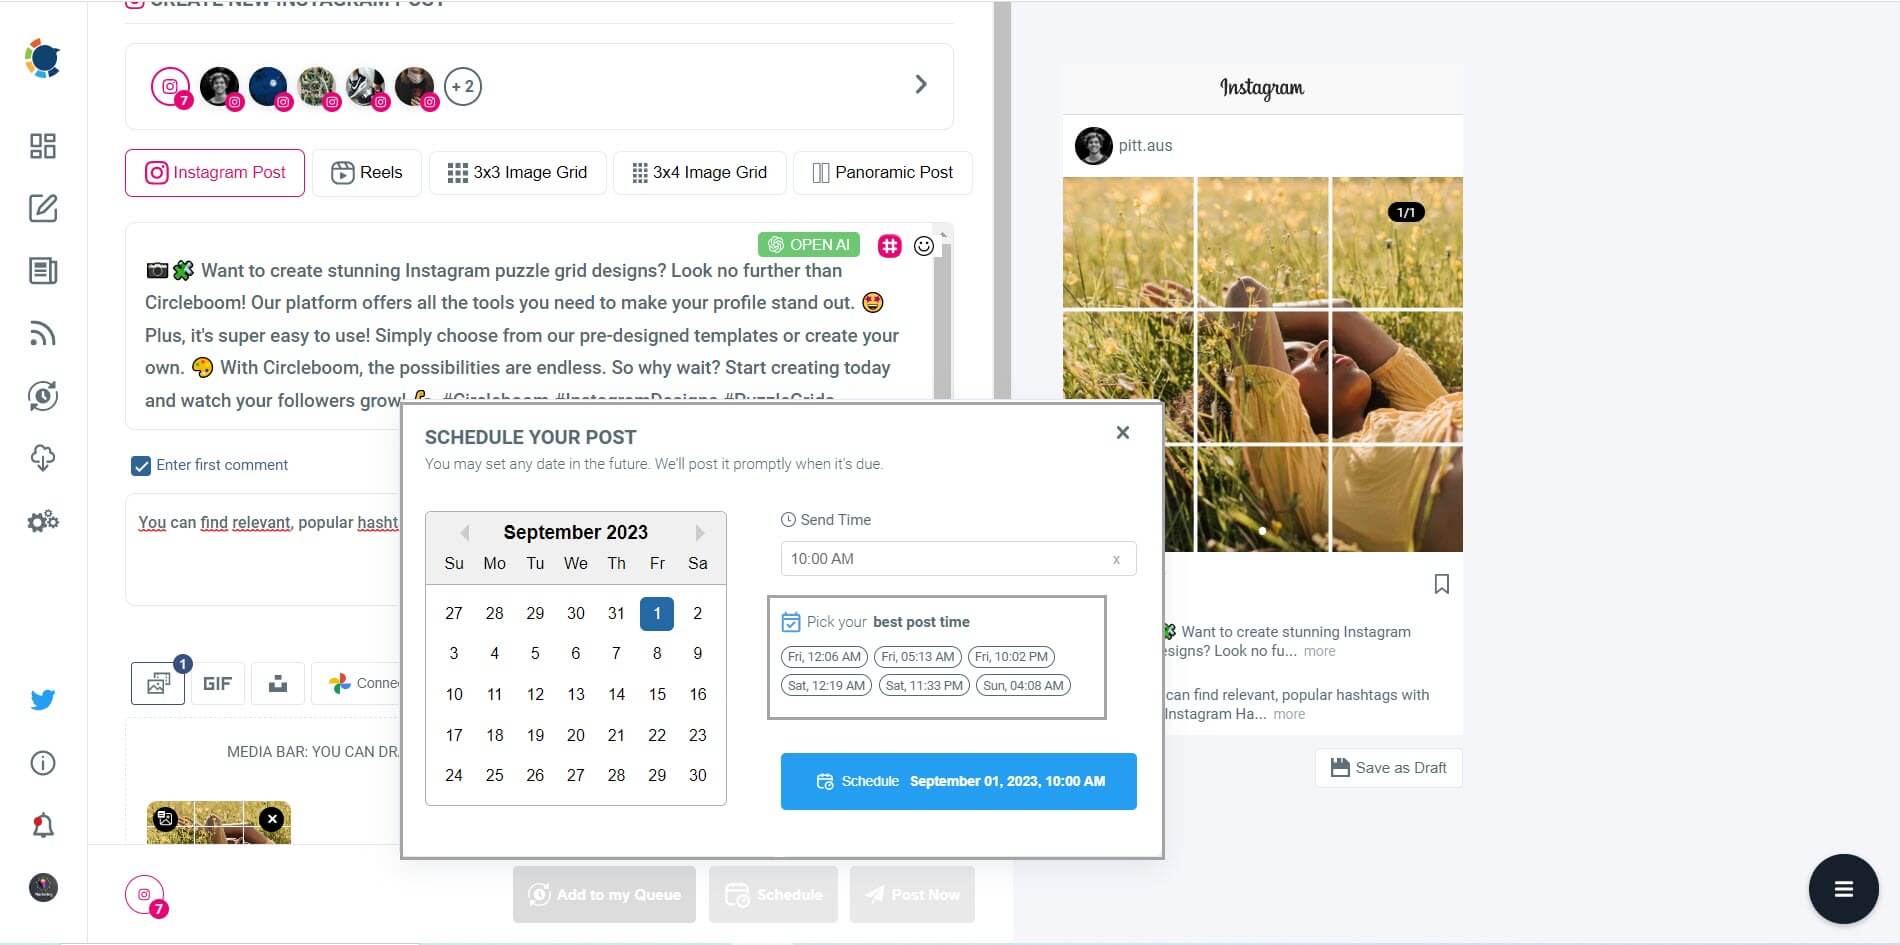 Schedule your Instagram puzzle feed at the best times